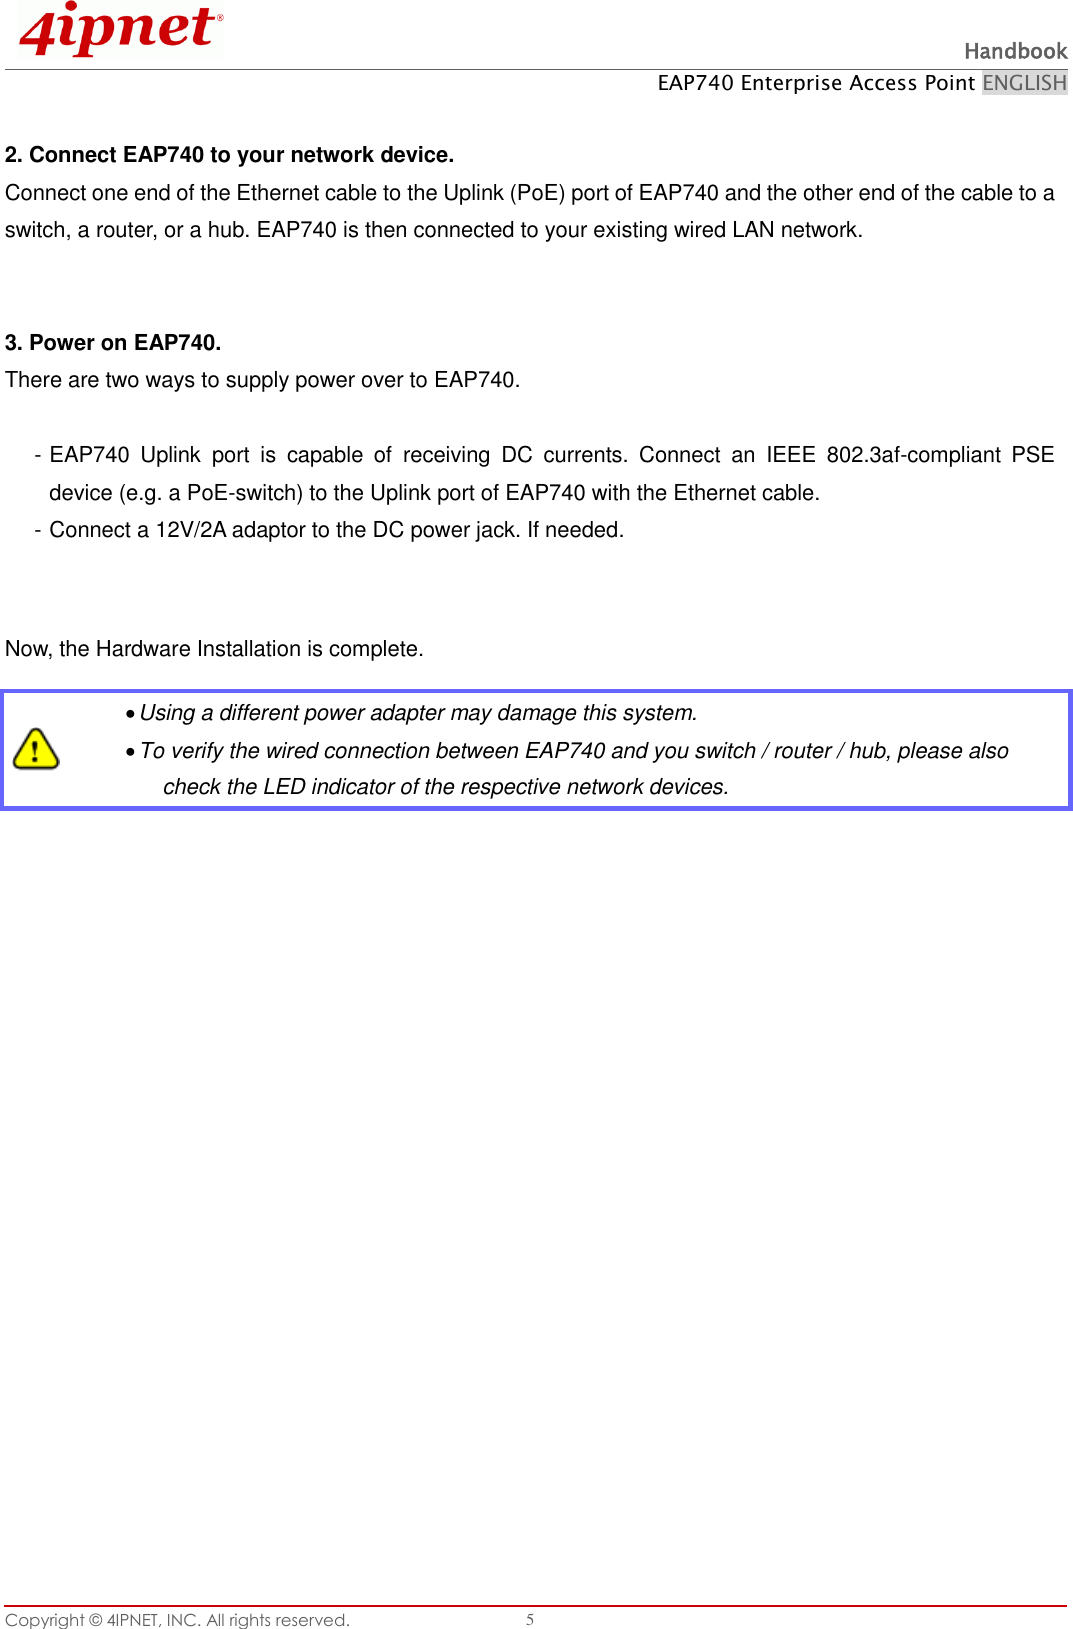 Page 10 of 4IPNET 180002 Enterprise Access Point User Manual QIG